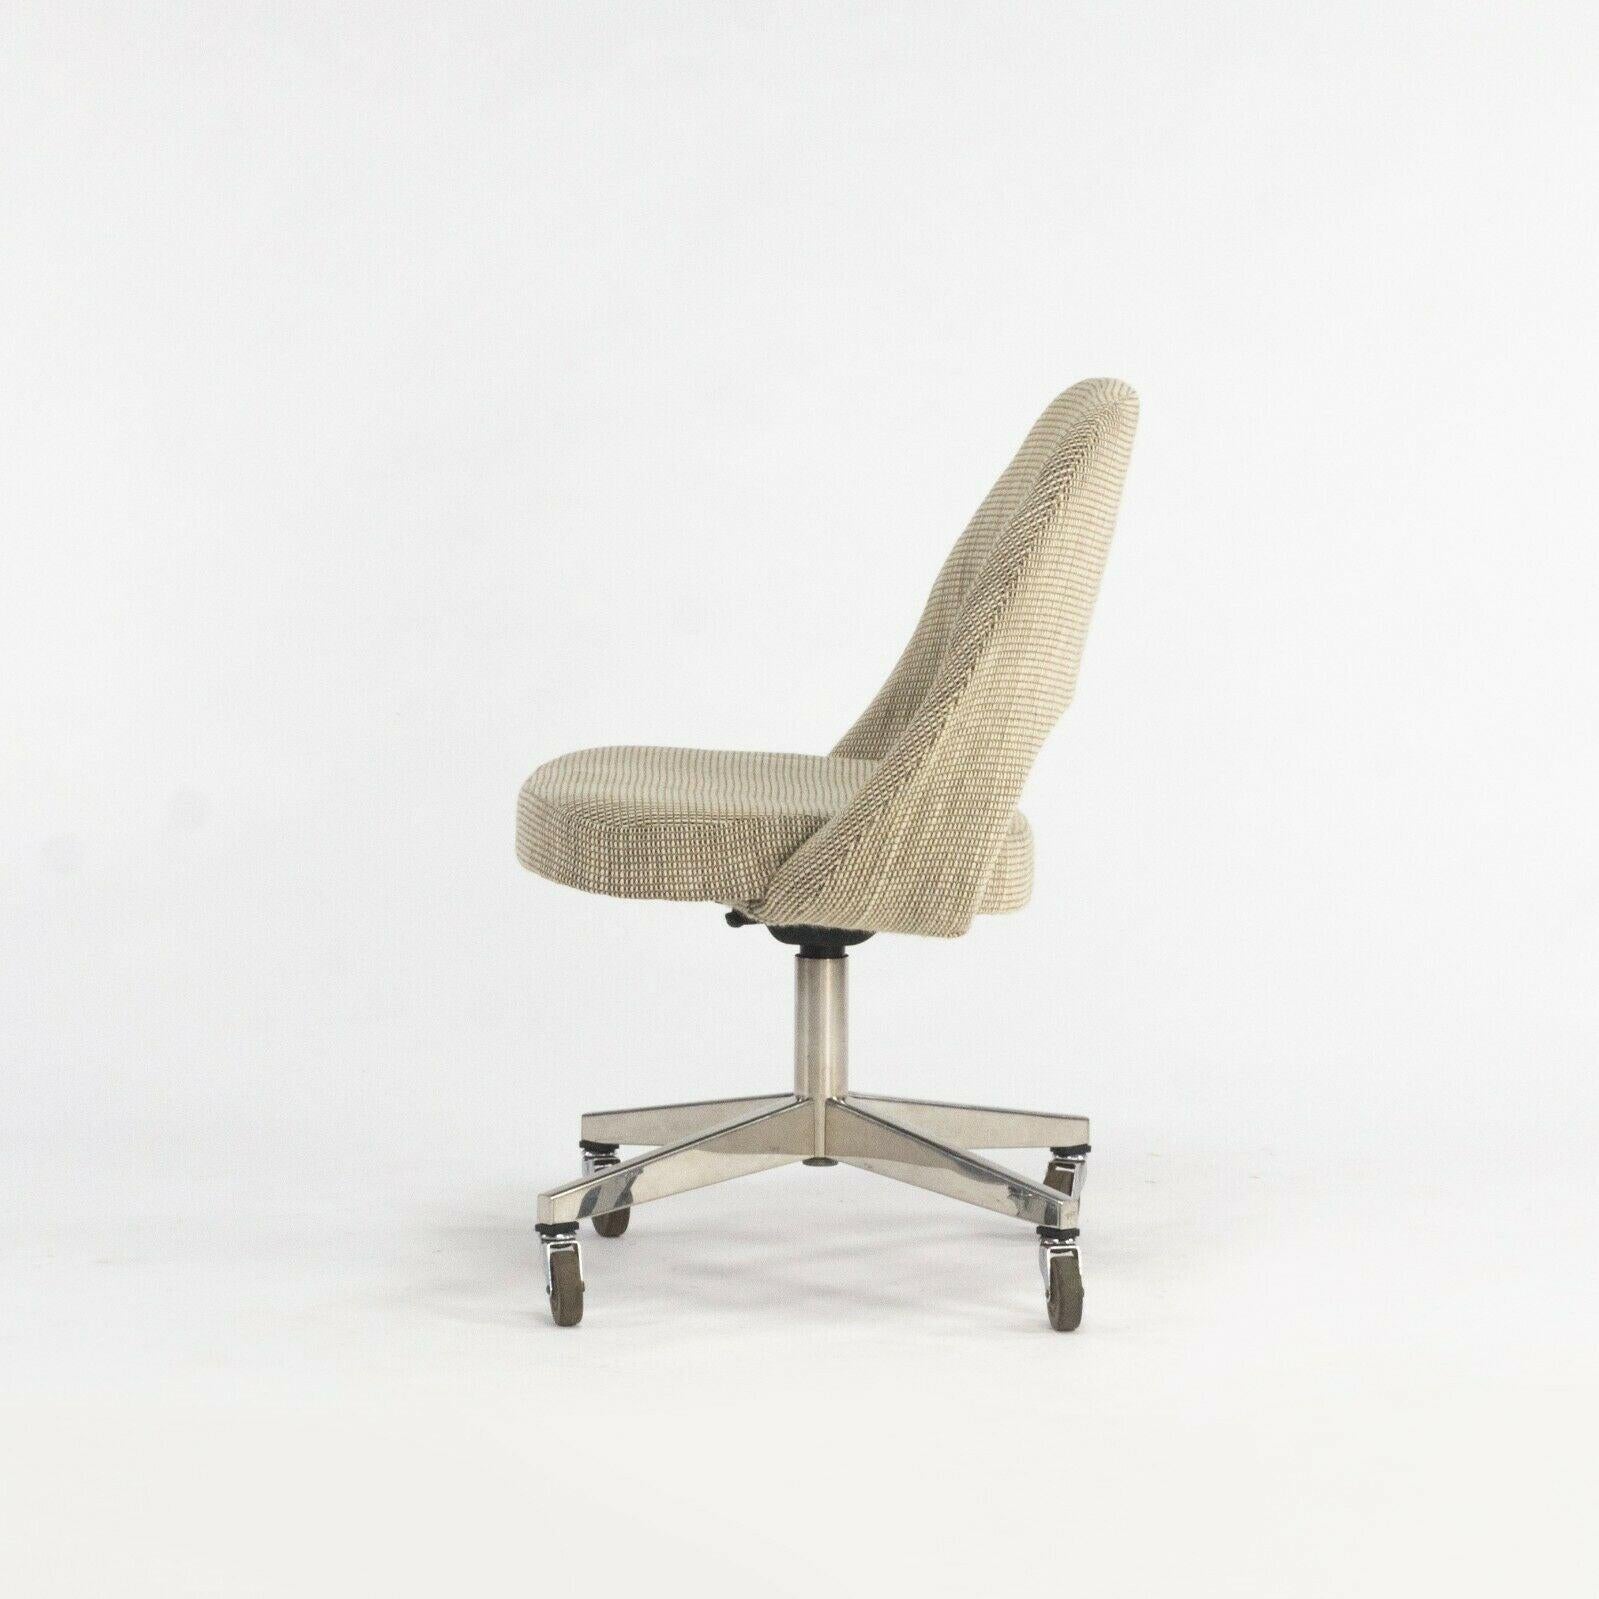 1974 Eero Saarinen for Knoll Rolling Executive Office Chairs Original Tan Fabric For Sale 2